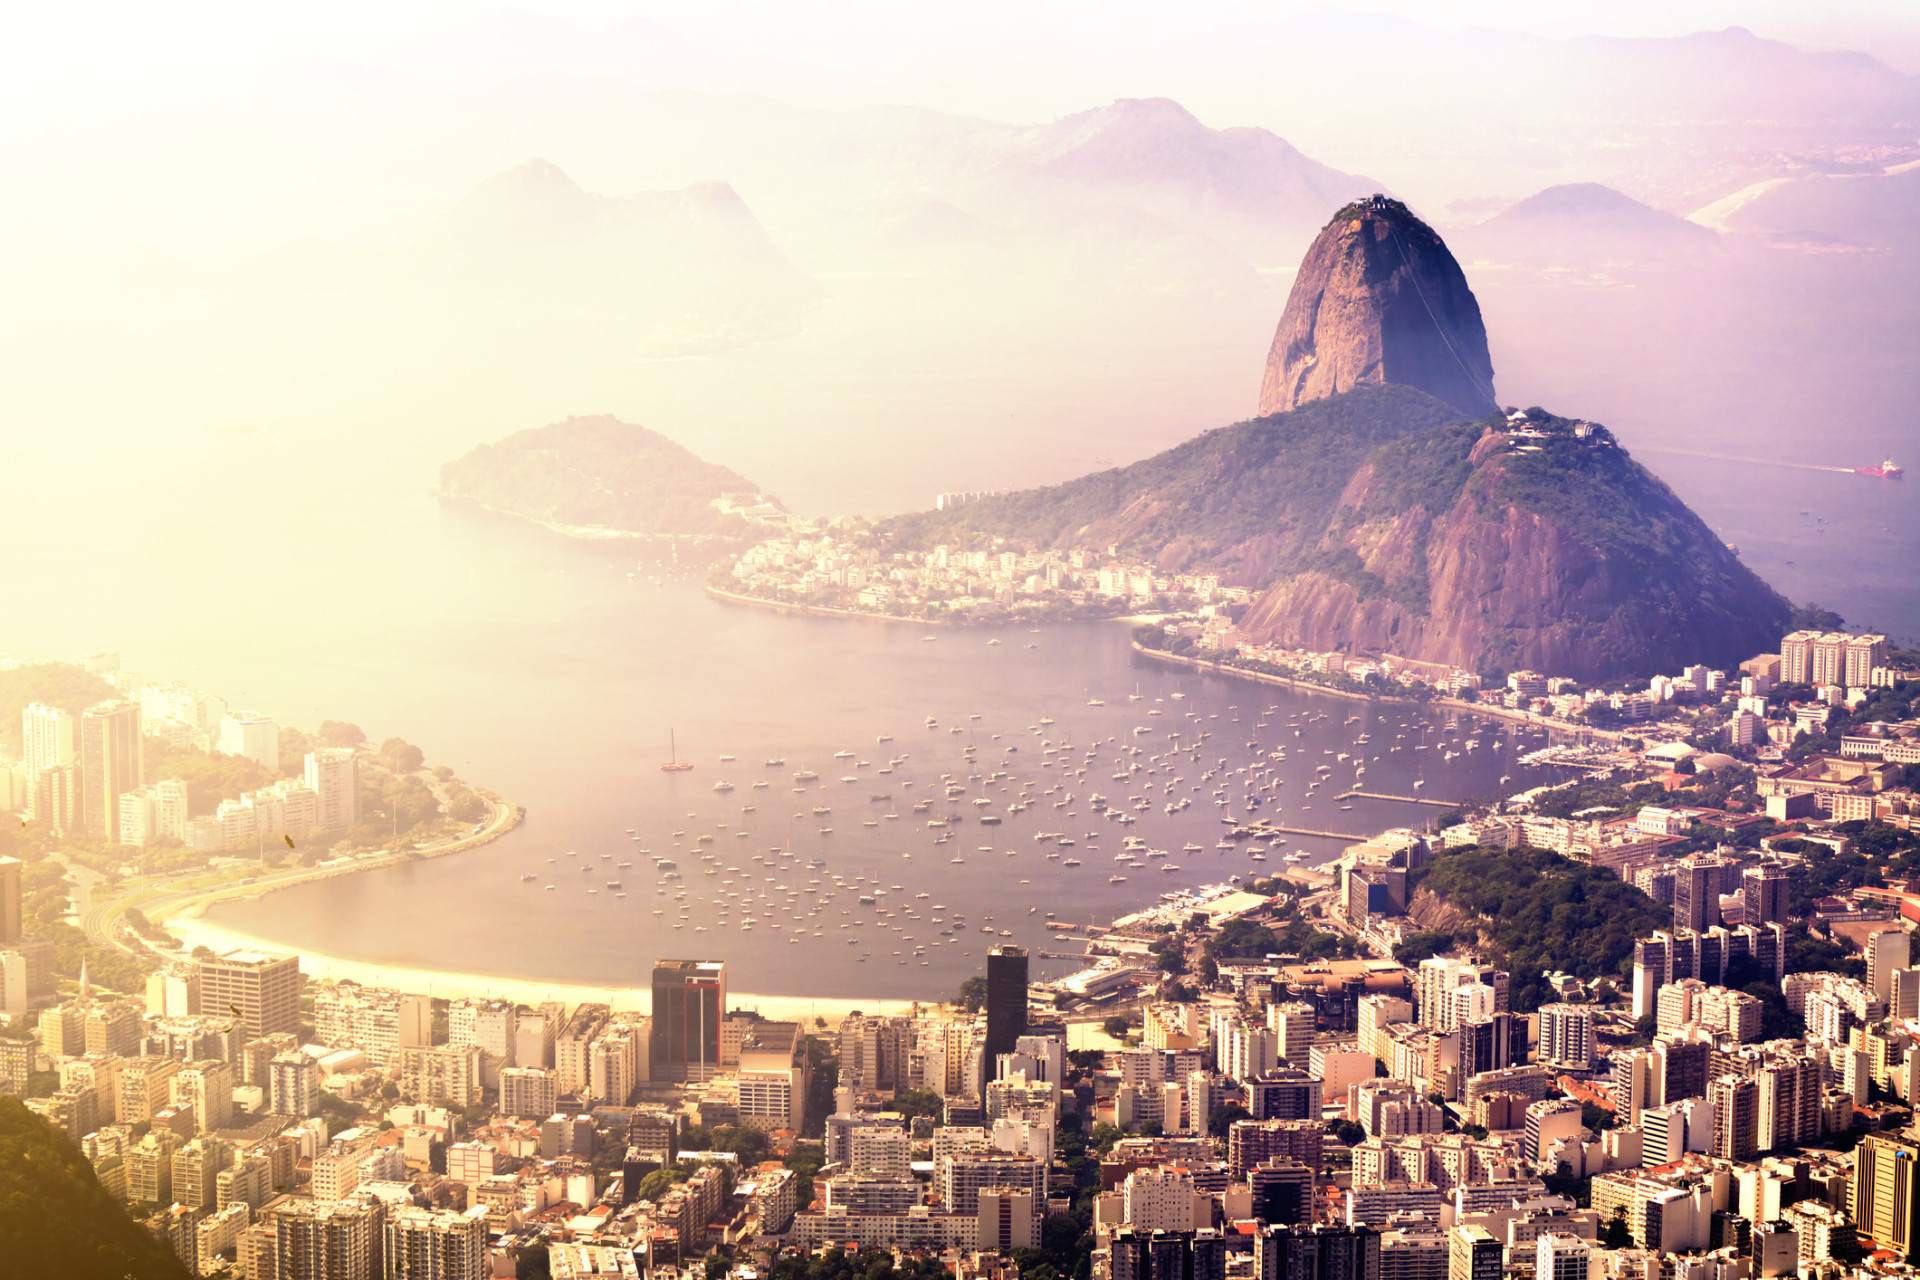 Rio de Janeiro is now a very popular choice for tourists and visitors to Brazil. It's the second-biggest metropolis in the country and home to the iconic Sugarloaf mountain and the Christ the Redeemer statue.<p>You may also like:<a href="https://www.starsinsider.com/n/369610?utm_source=msn.com&utm_medium=display&utm_campaign=referral_description&utm_content=292997v1en-us"> Hit songs you didn't know were written by Prince</a></p>